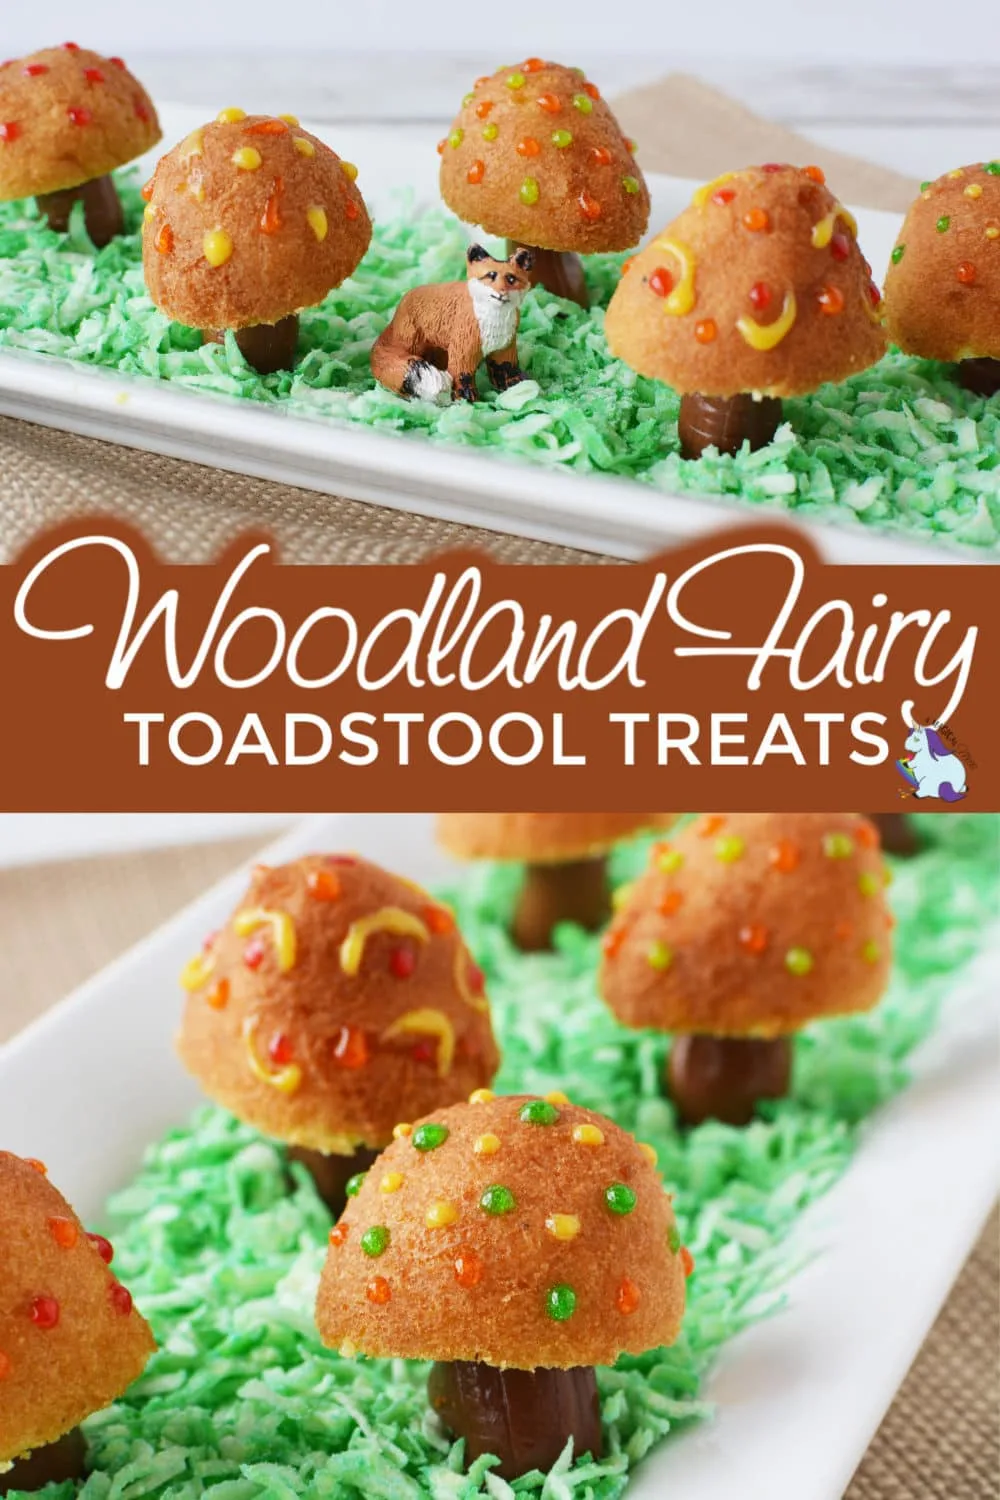 Woodland fairy Toadstool treats on a plate with edible grass and a fox toy.